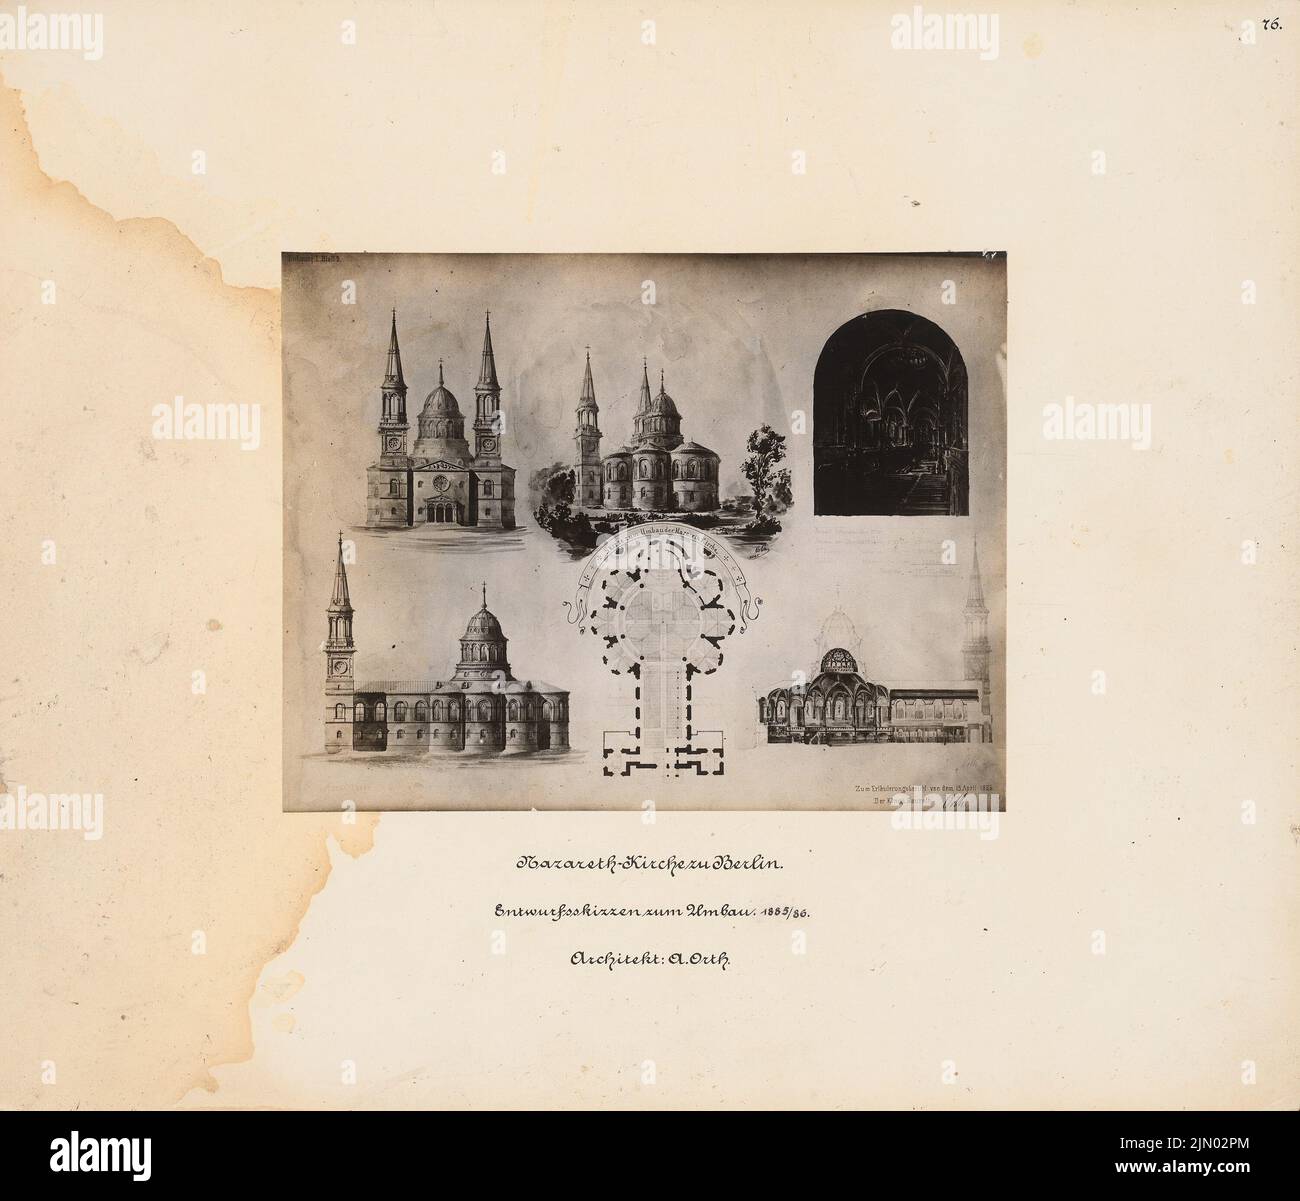 Orth August (1828-1901), Nazarethkirche (1835), Berlin-Wedding. Project I (conversion) (1885-1886): 2 normal views, 1 perspective view, 1 floor plan, 1 interior perspective, 1 longitudinal section, (see Inv.No. 14172). Photo on cardboard, 33.5 x 39.2 cm (including scan edges) Orth August  (1828-1901): Nazarethkirche (1835), Berlin-Wedding. Projekt I (Umbau) Stock Photo